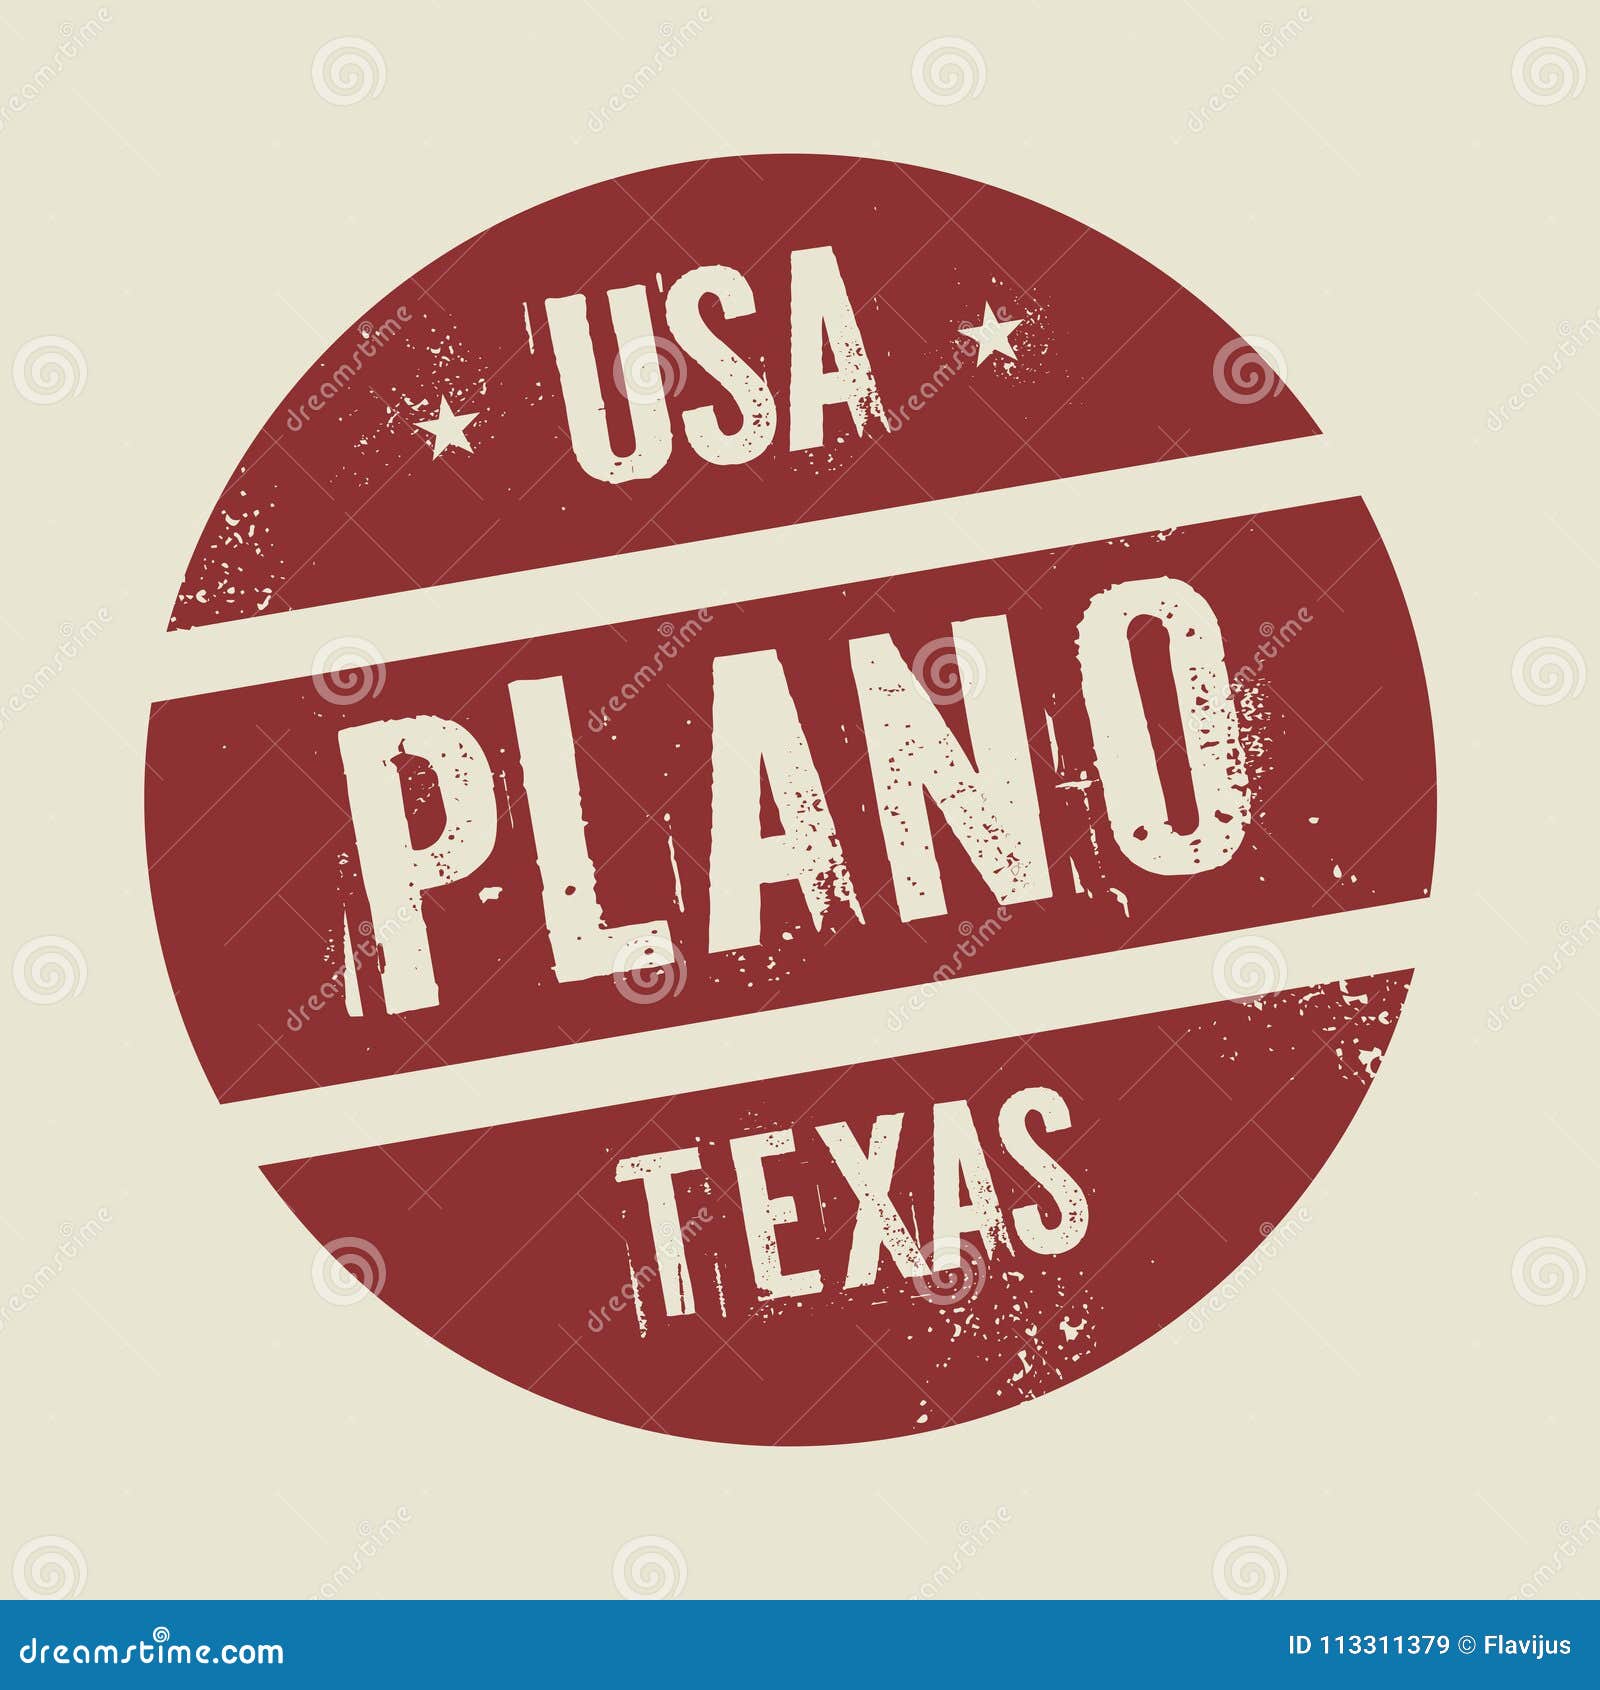 grunge vintage round stamp with text plano, texas